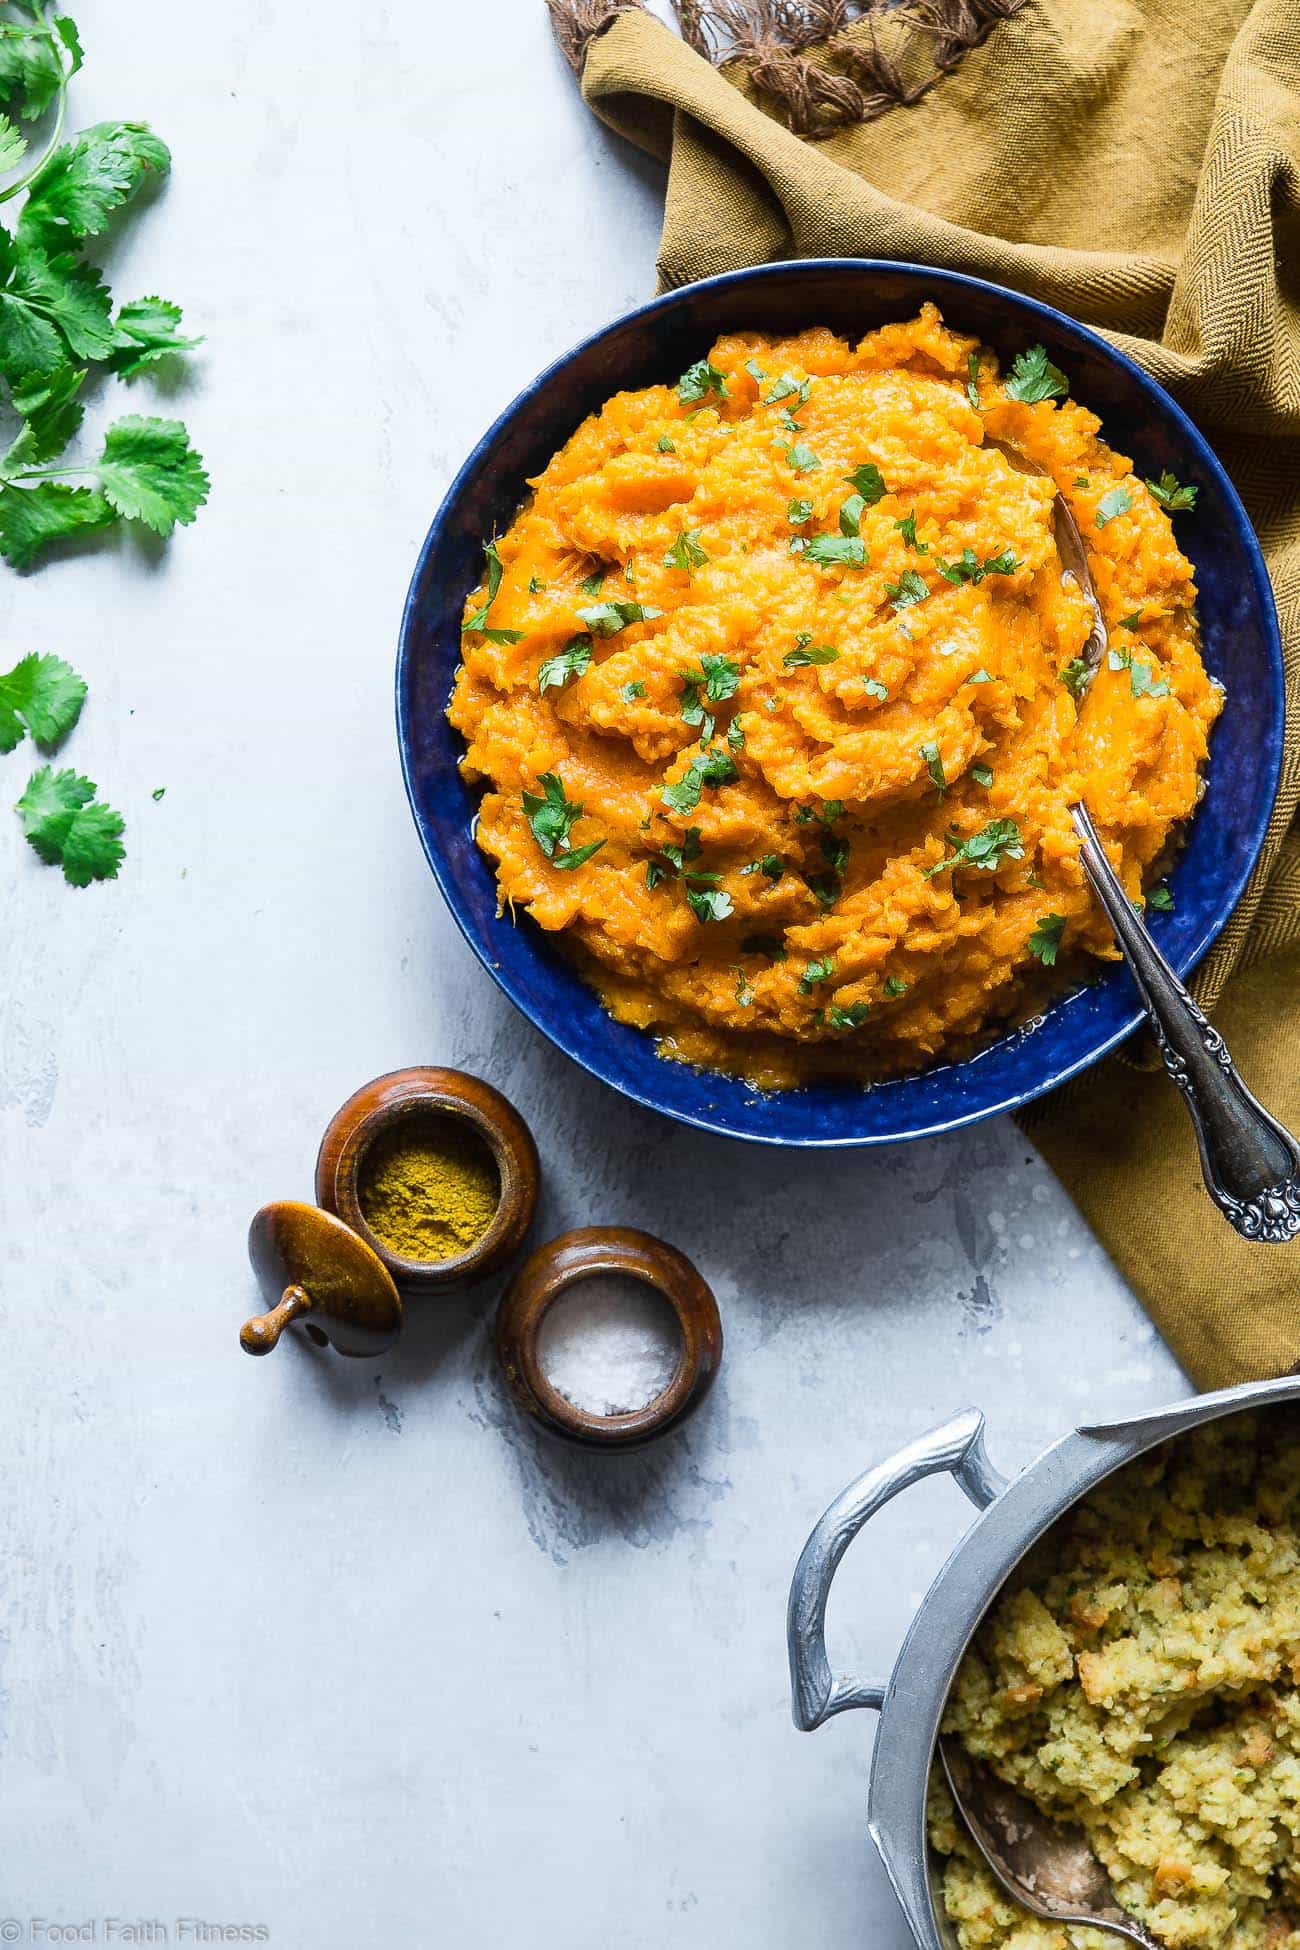 Curried Savory Vegan Healthy Mashed Sweet Potatoes - Ever wondered how to make healthy mashed sweet potatoes? This recipe is a sweet and spicy spin on a holiday classic!  So creamy you will never believe they are dairy, grain and gluten free and paleo/vegan/whole30 compliant! | Foodfaithfitness.com | @FoodFaithFit